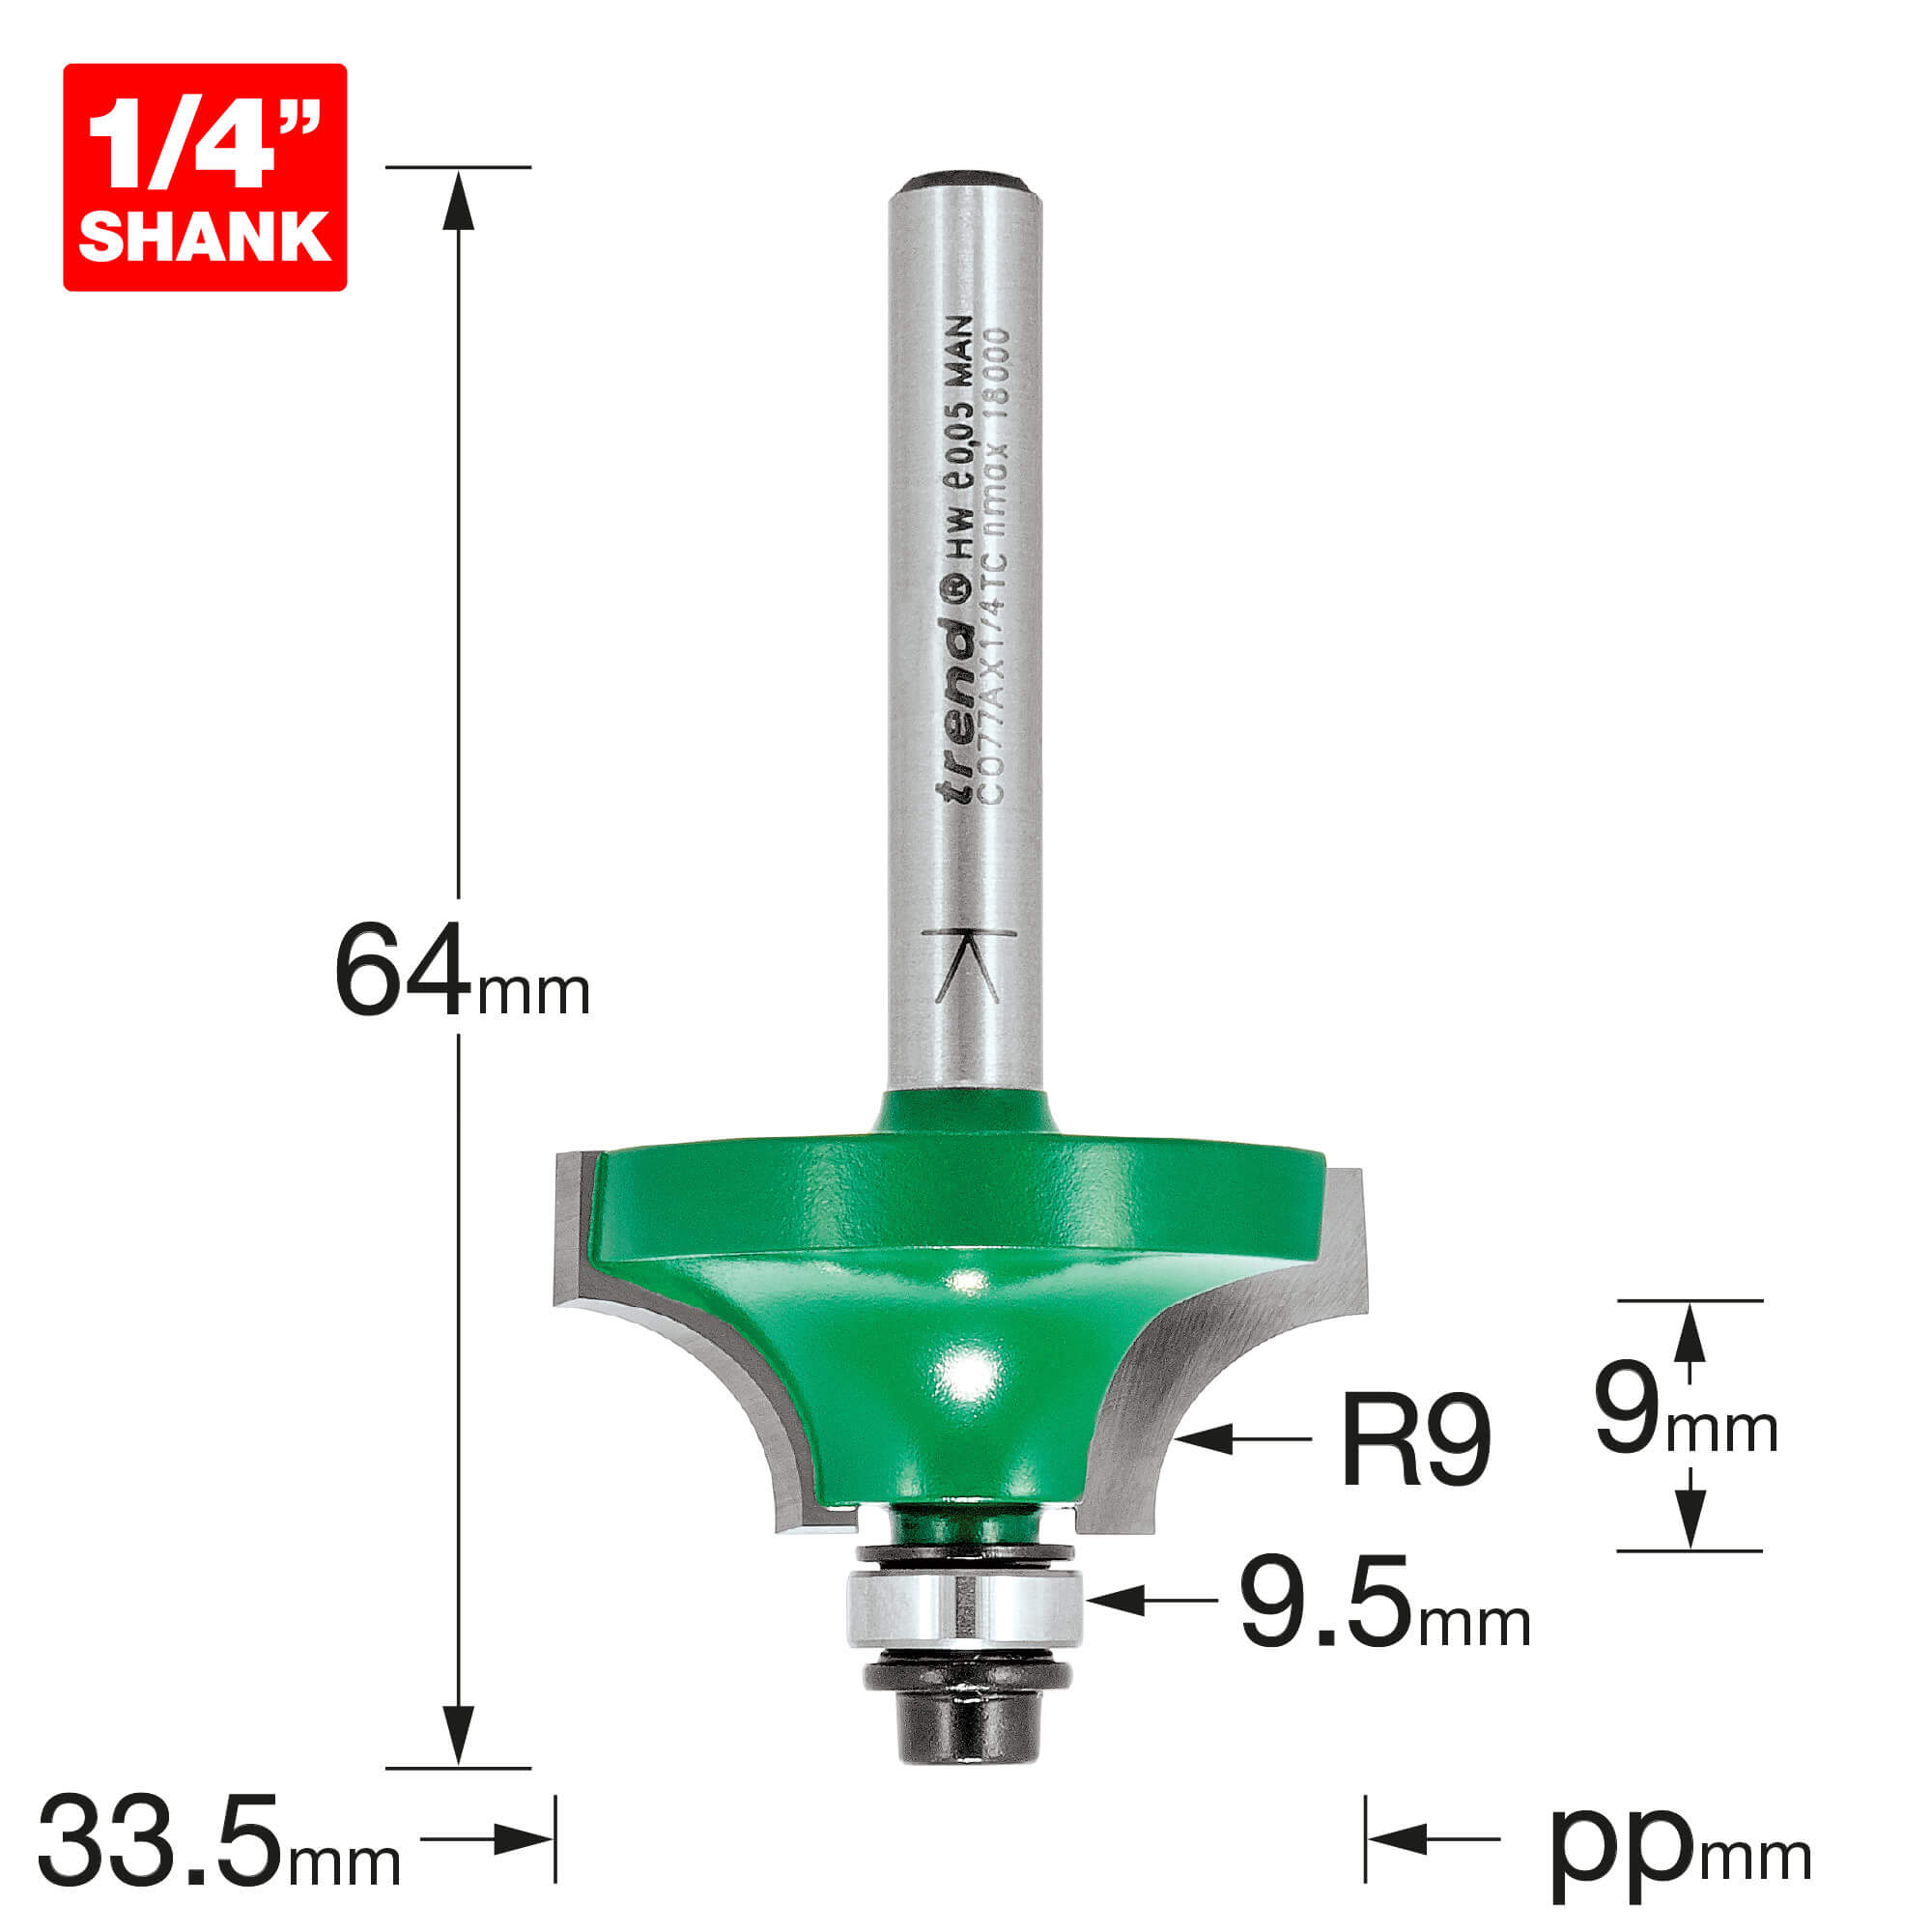 Image of Trend CRAFTPRO Bearing Guided Shoulder Profile Router Cutter 33.5mm 9mm 1/4"